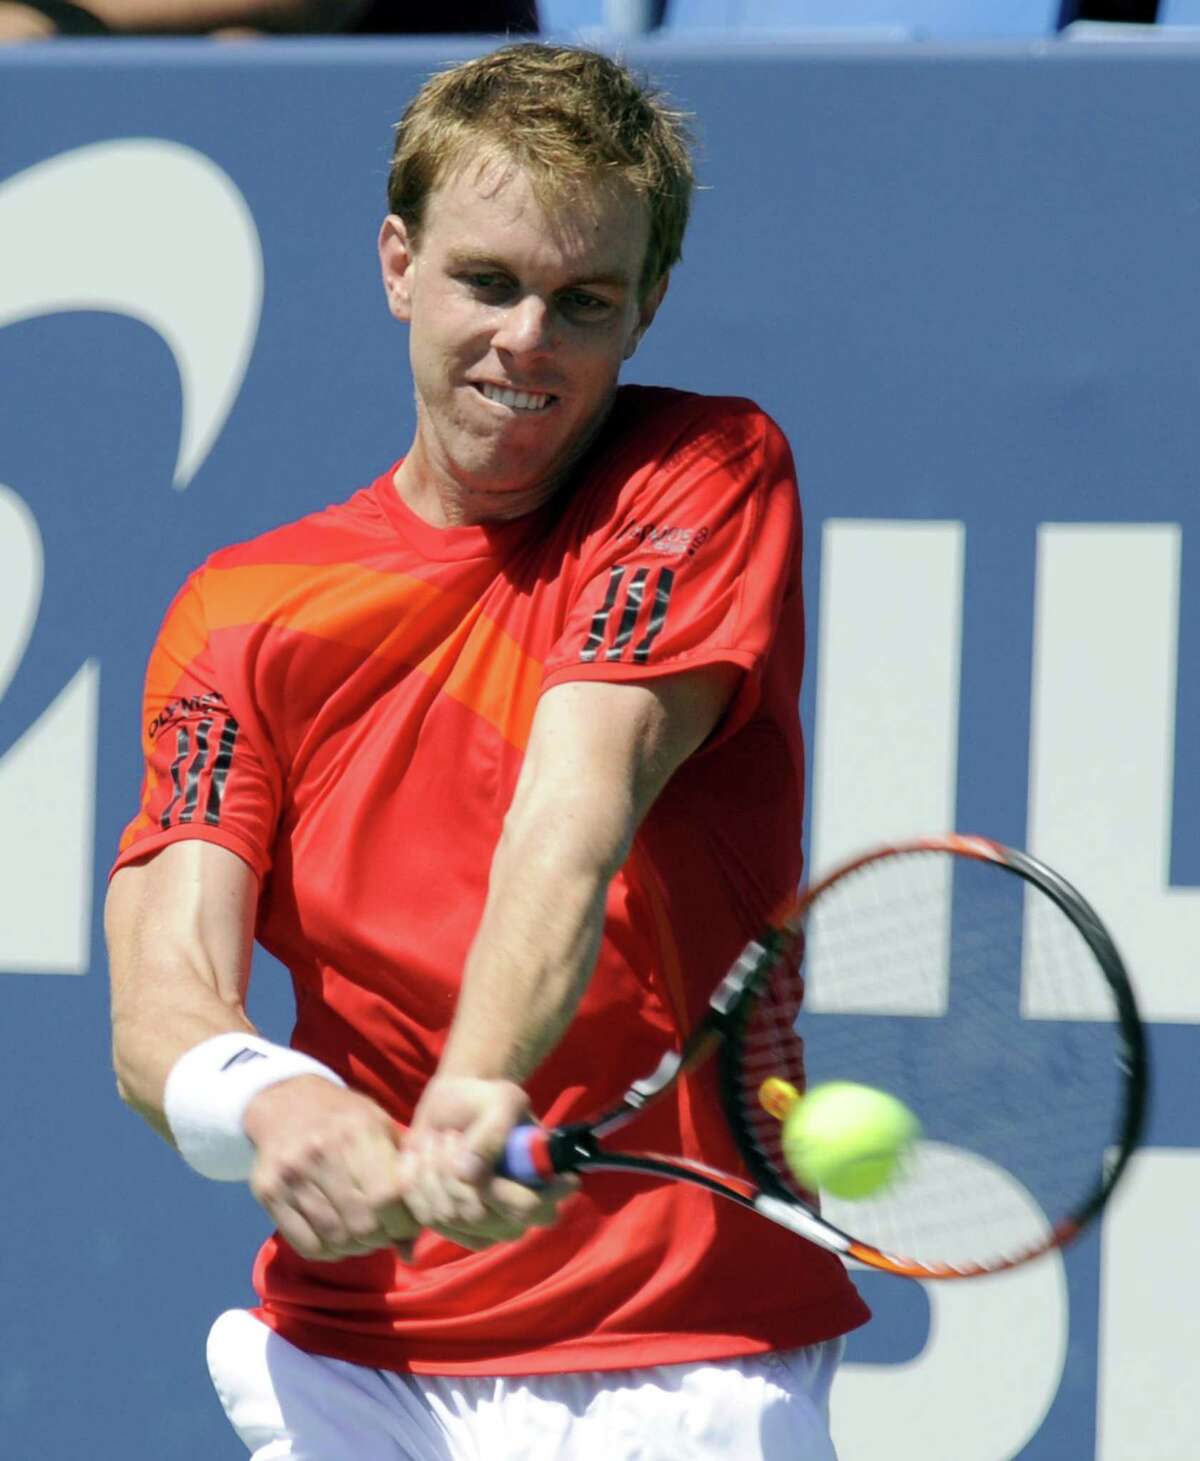 Sam Querrey of the United States, hits a backhand return to Russia's Nikolay Davydenko during the Pilot Pen tennis tournament in New Haven, Conn., Thursday, Aug. 27, 2009. (AP Photo/Bob Child)